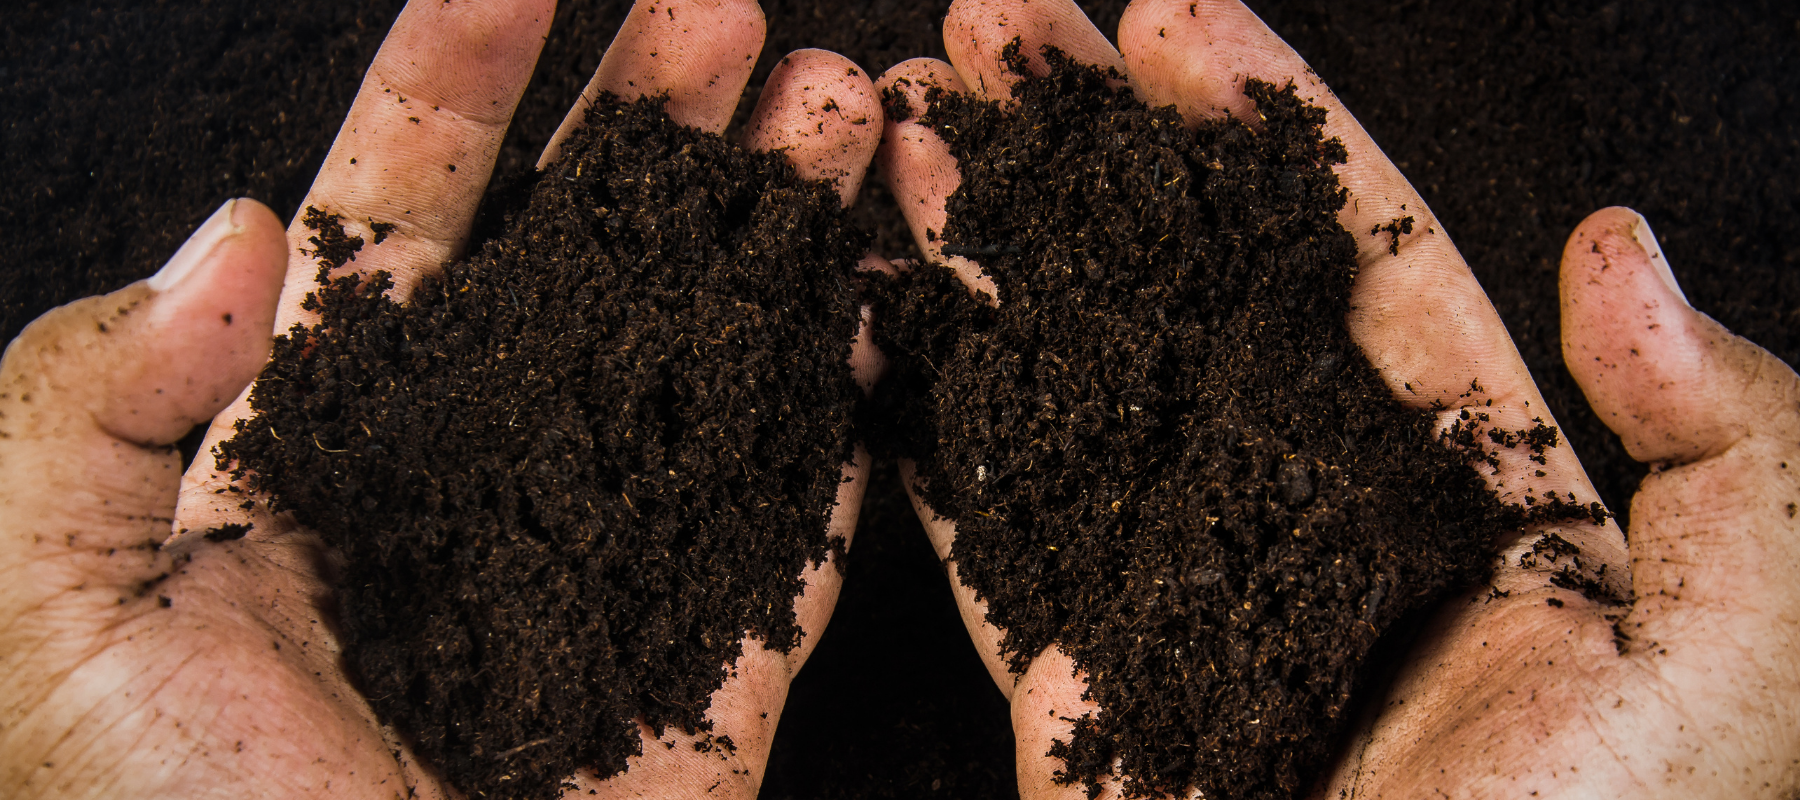 How to test your soil PH